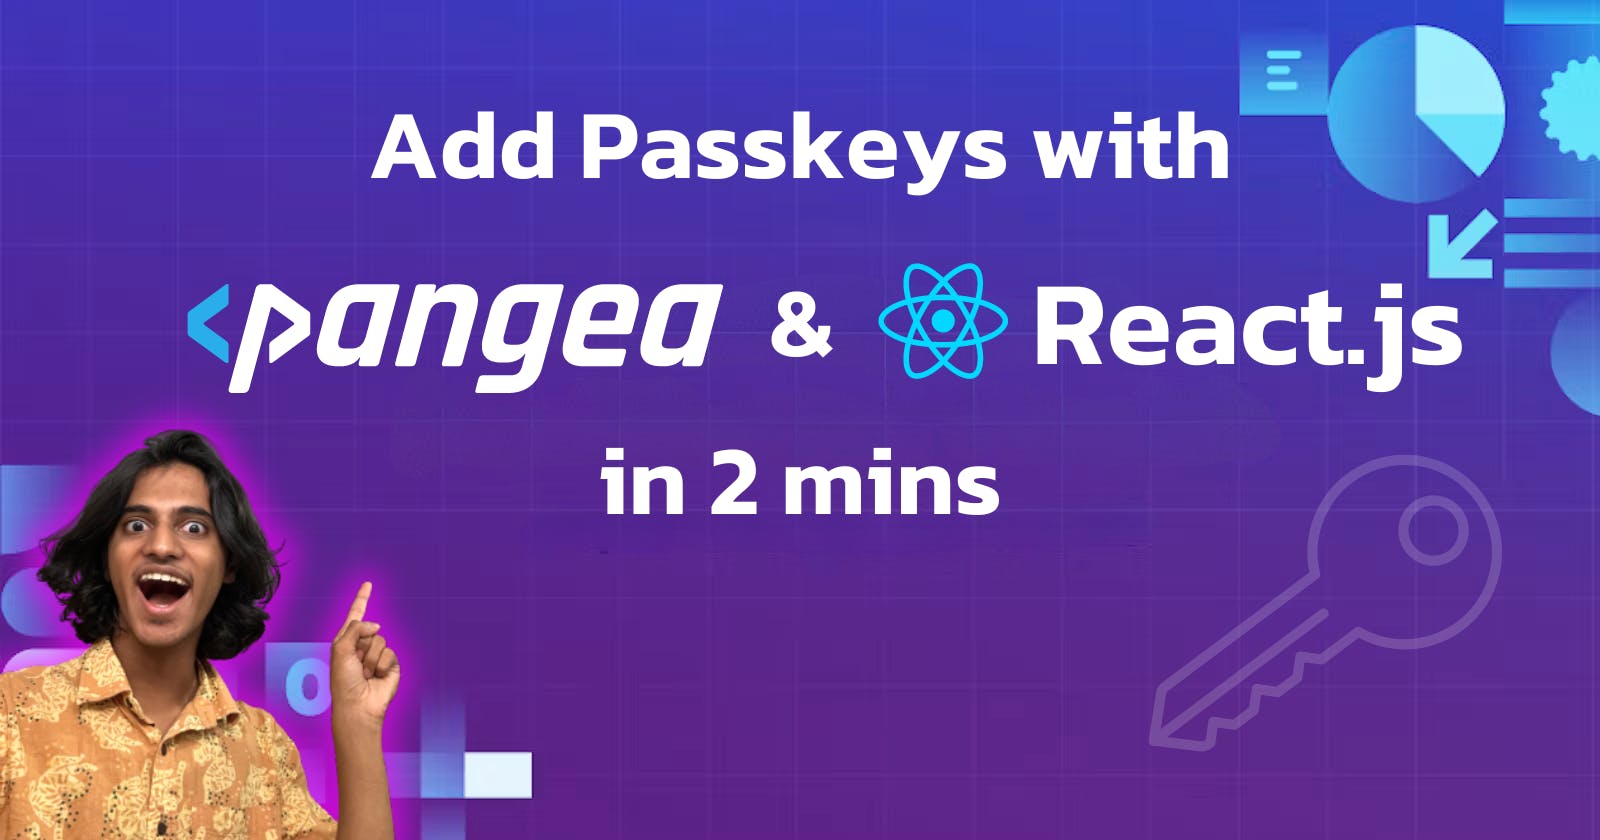 Add "Login with Passkeys" to your React.js app in < 2 mins